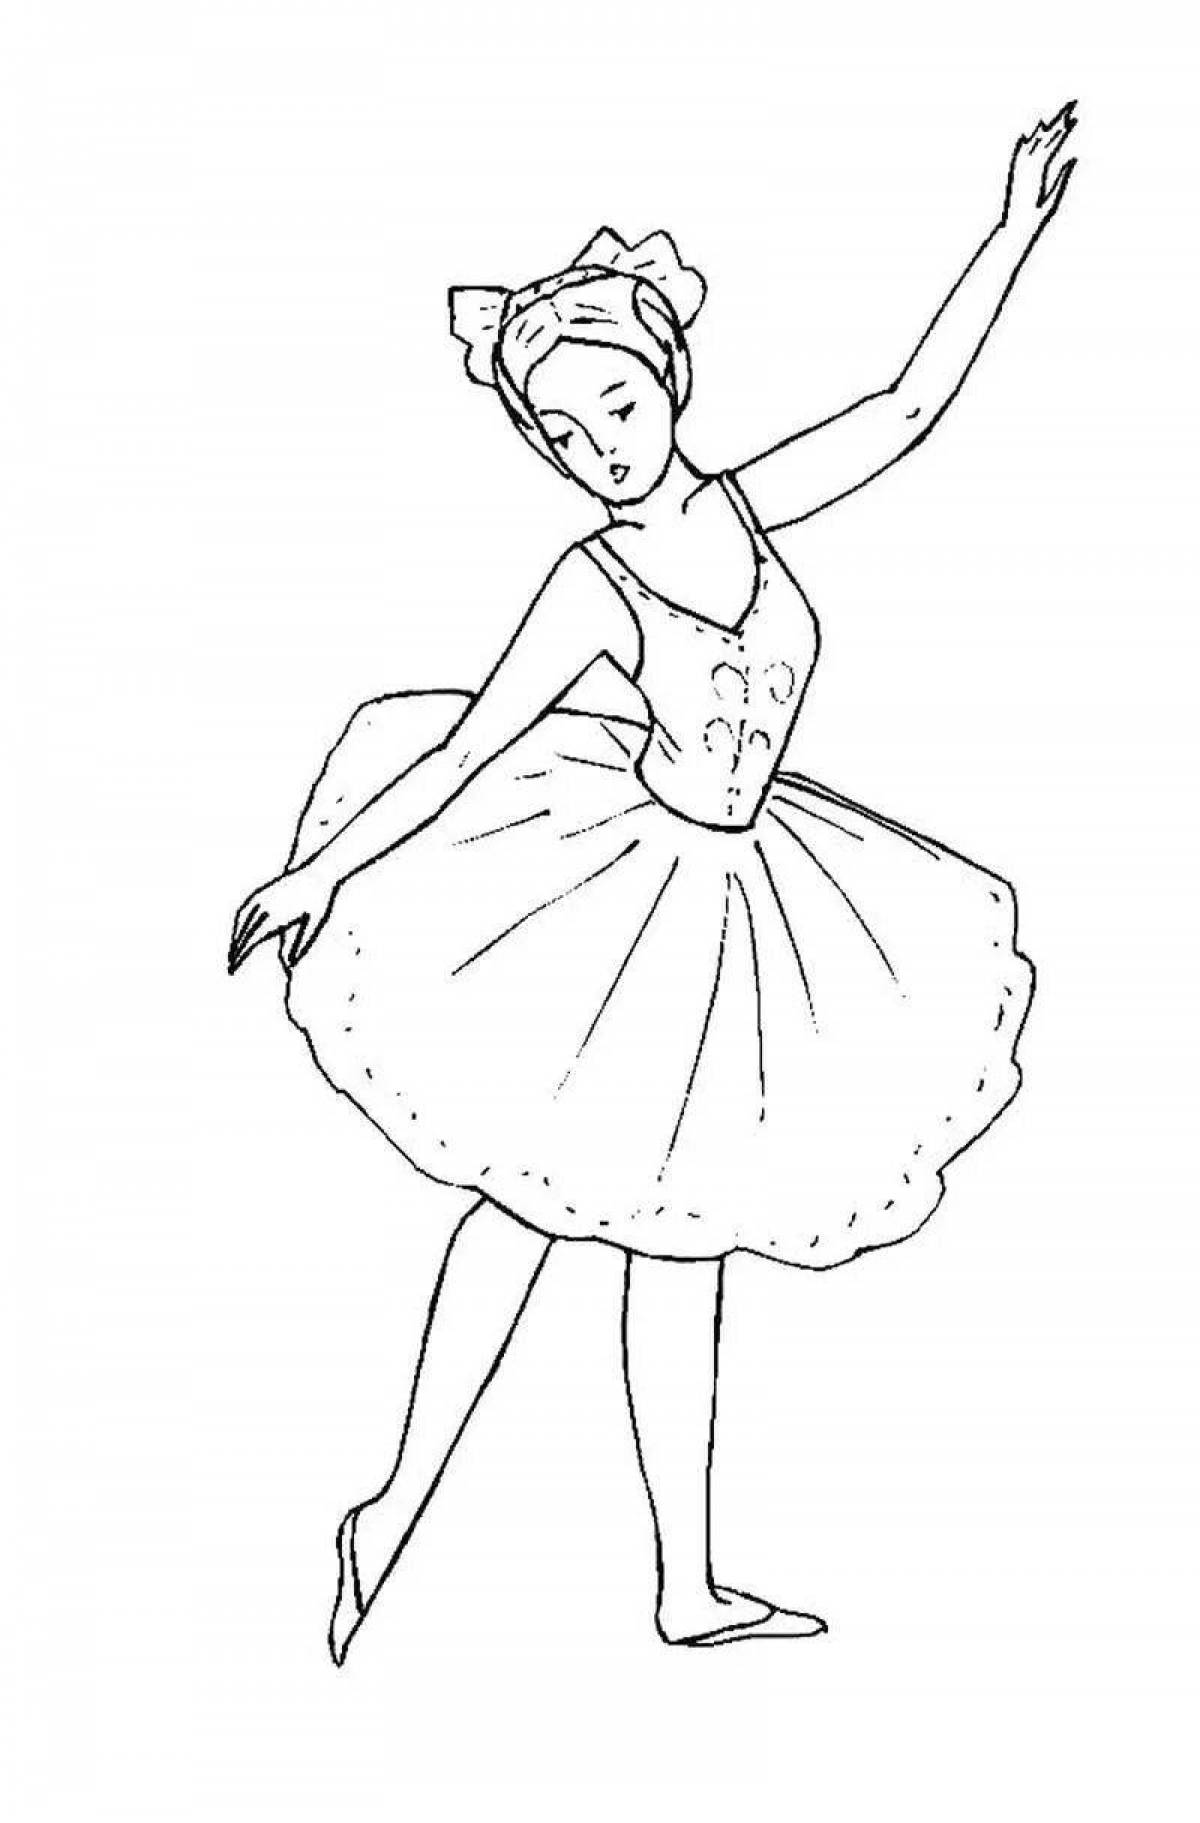 Coloring page glorious dance